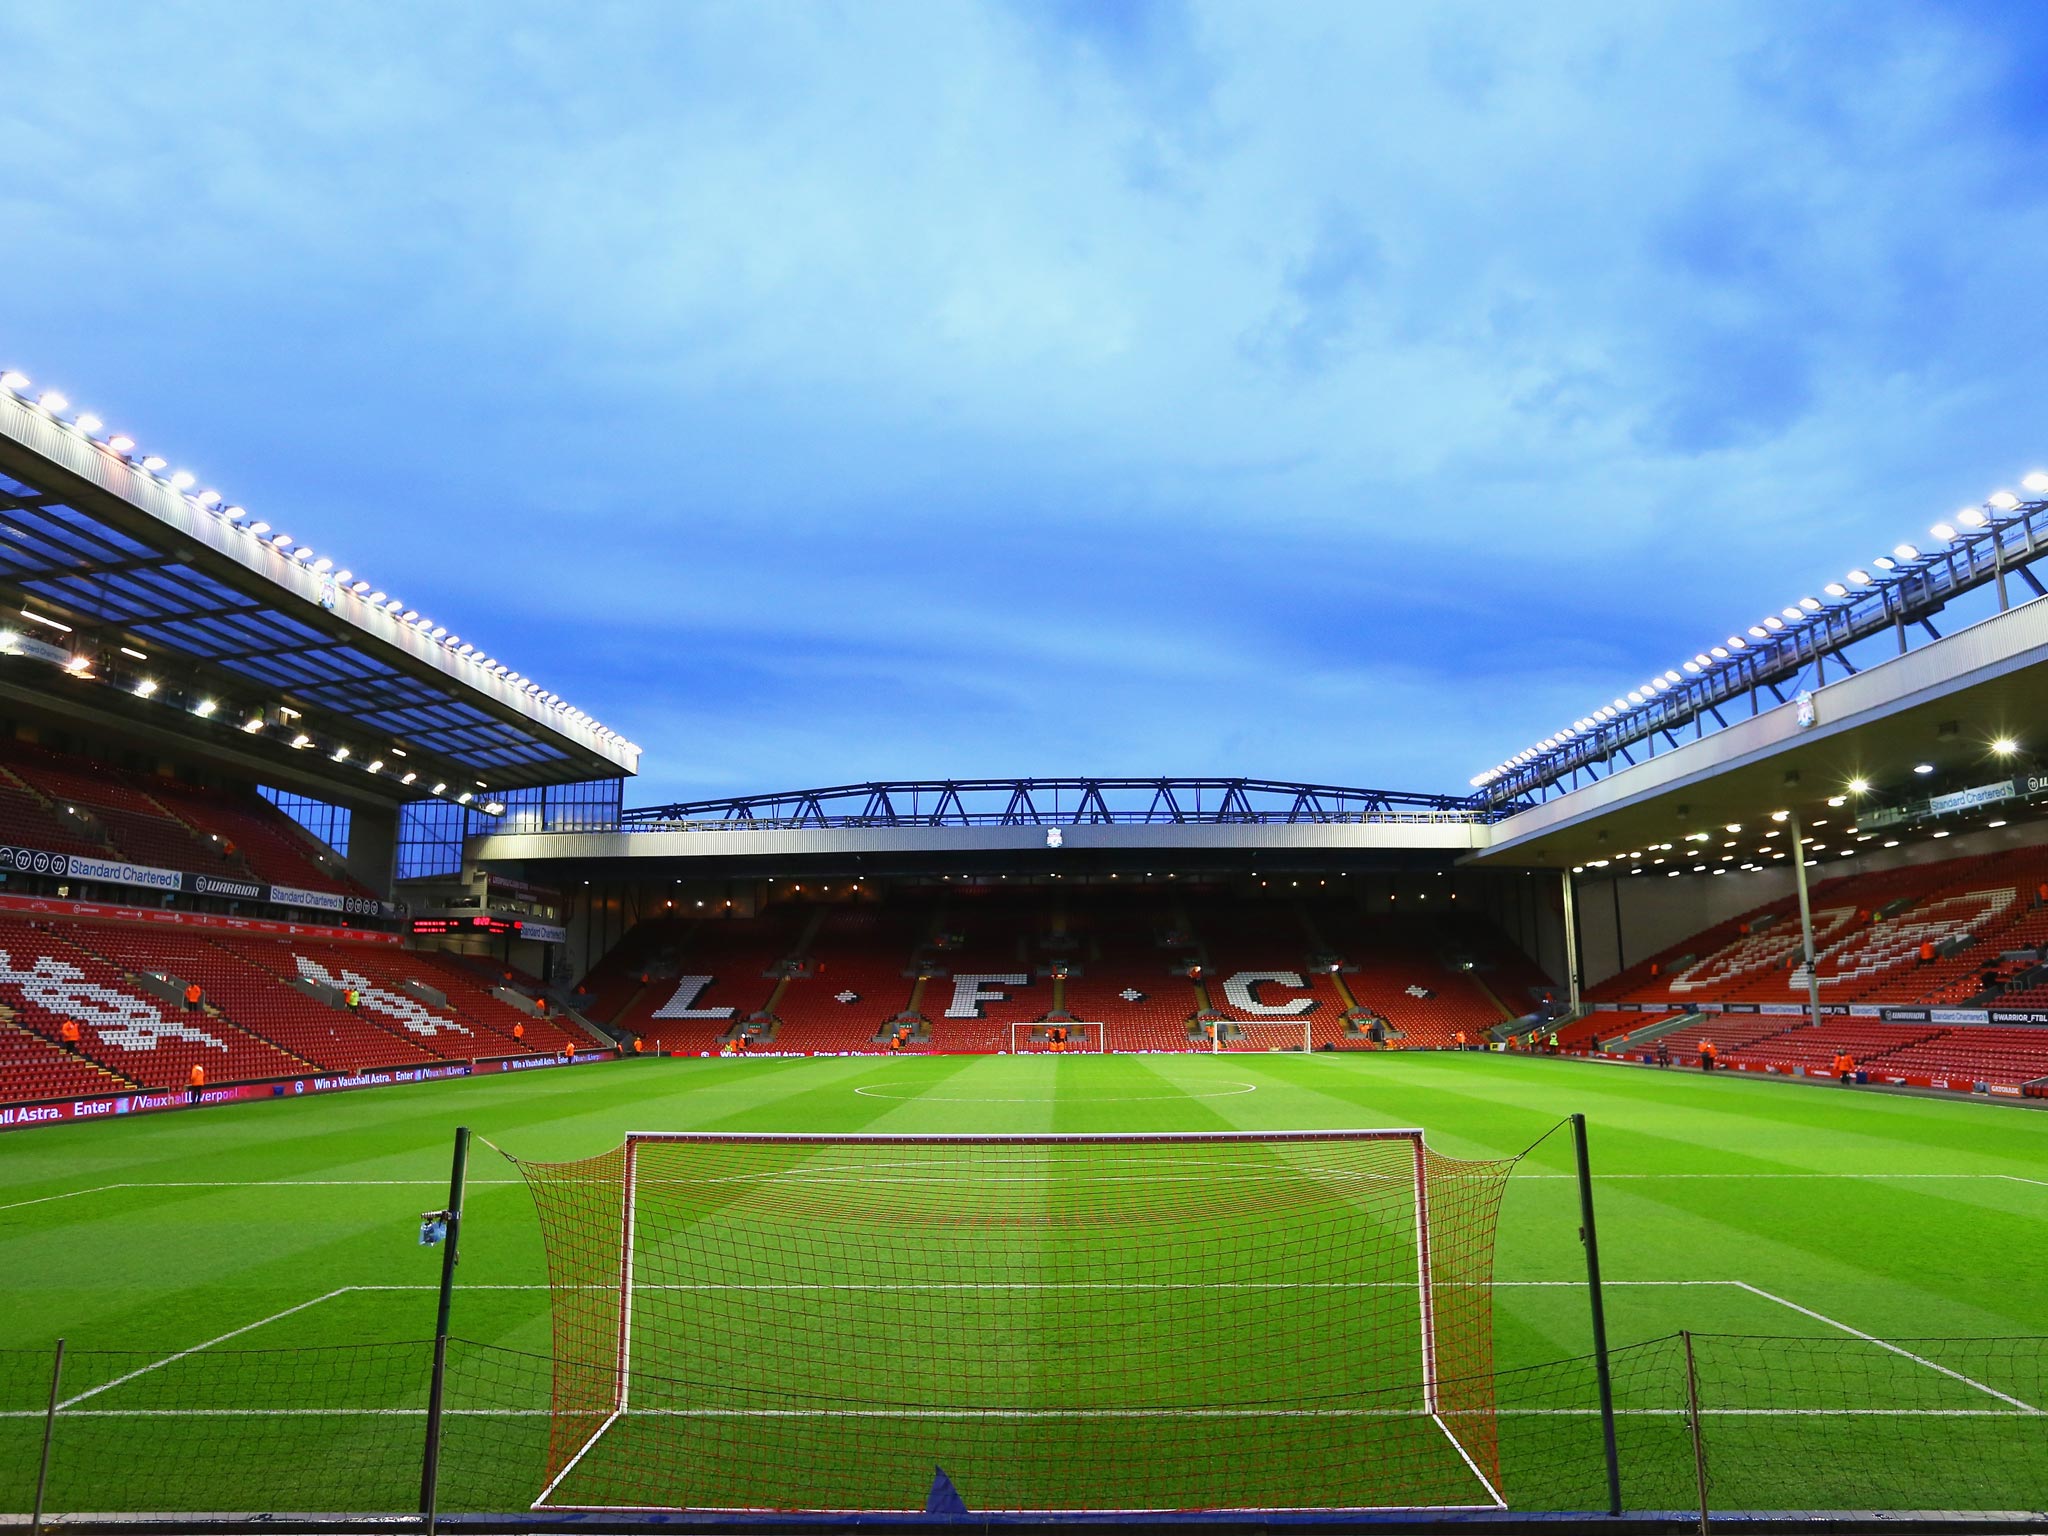 A general view of Liverpool's Anfield stadium as it is today